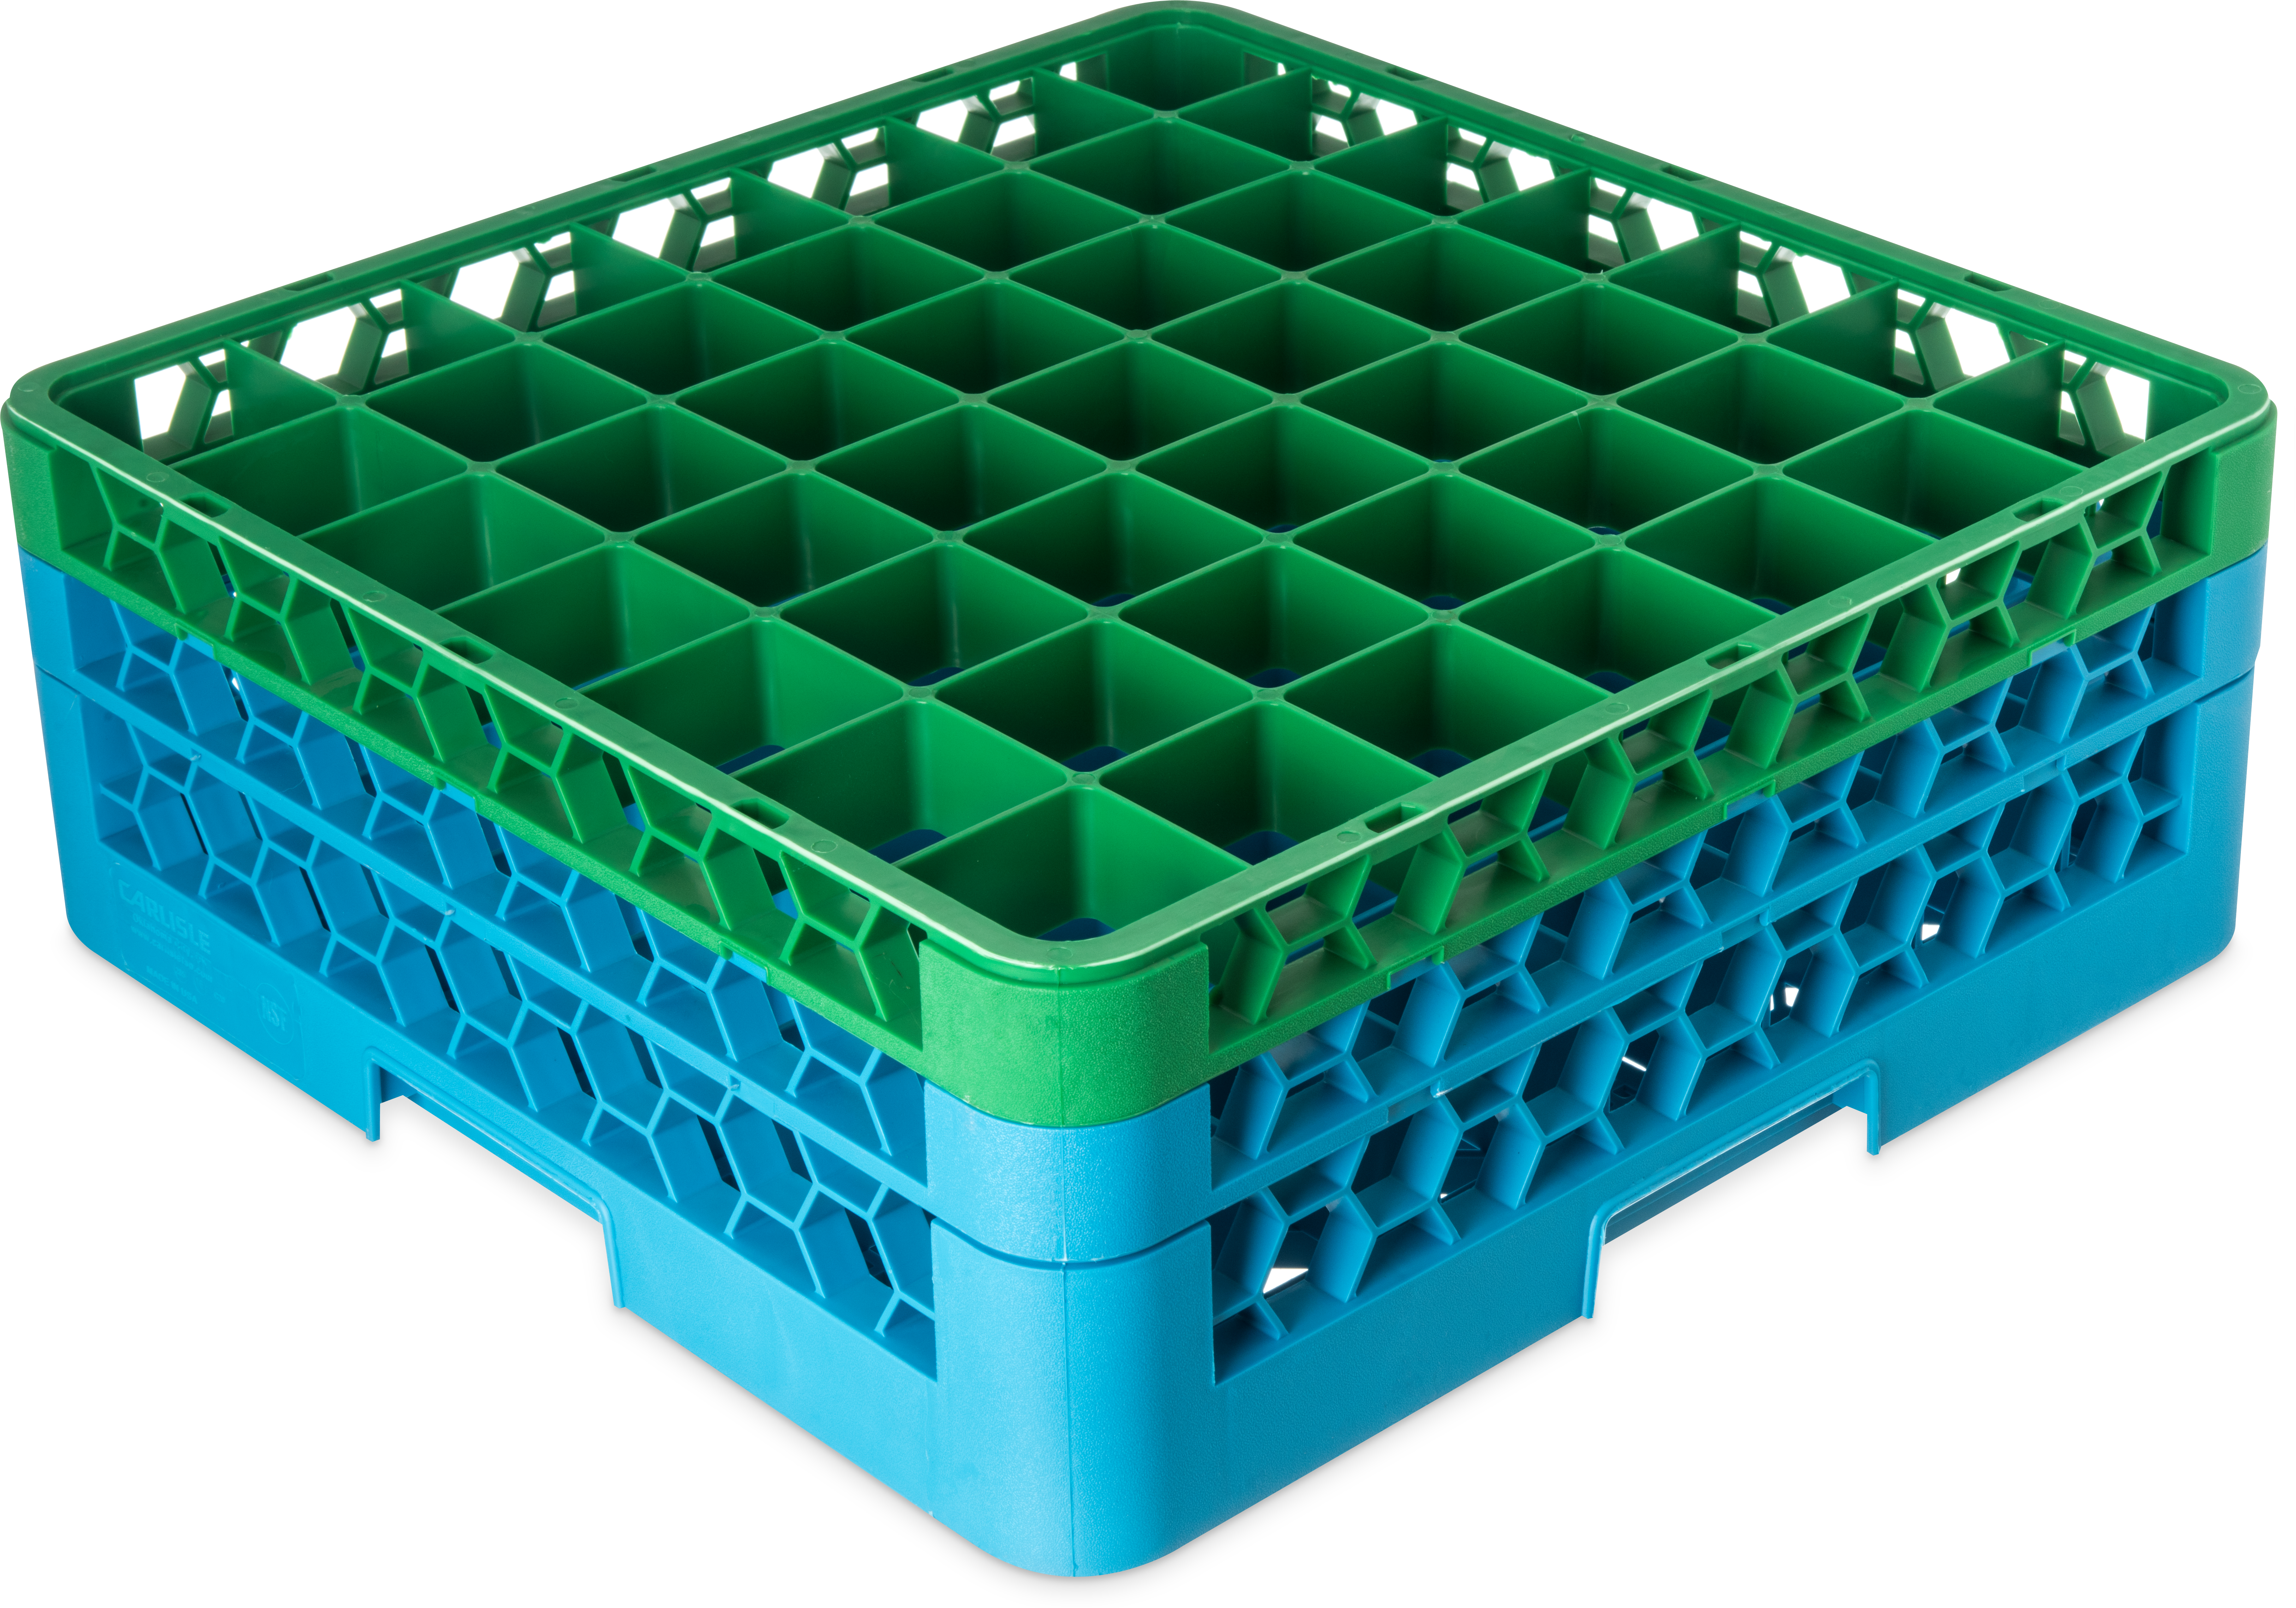 OptiClean 49 Compartment Glass Rack with 2 Extenders 7.12 - Green-Carlisle Blue